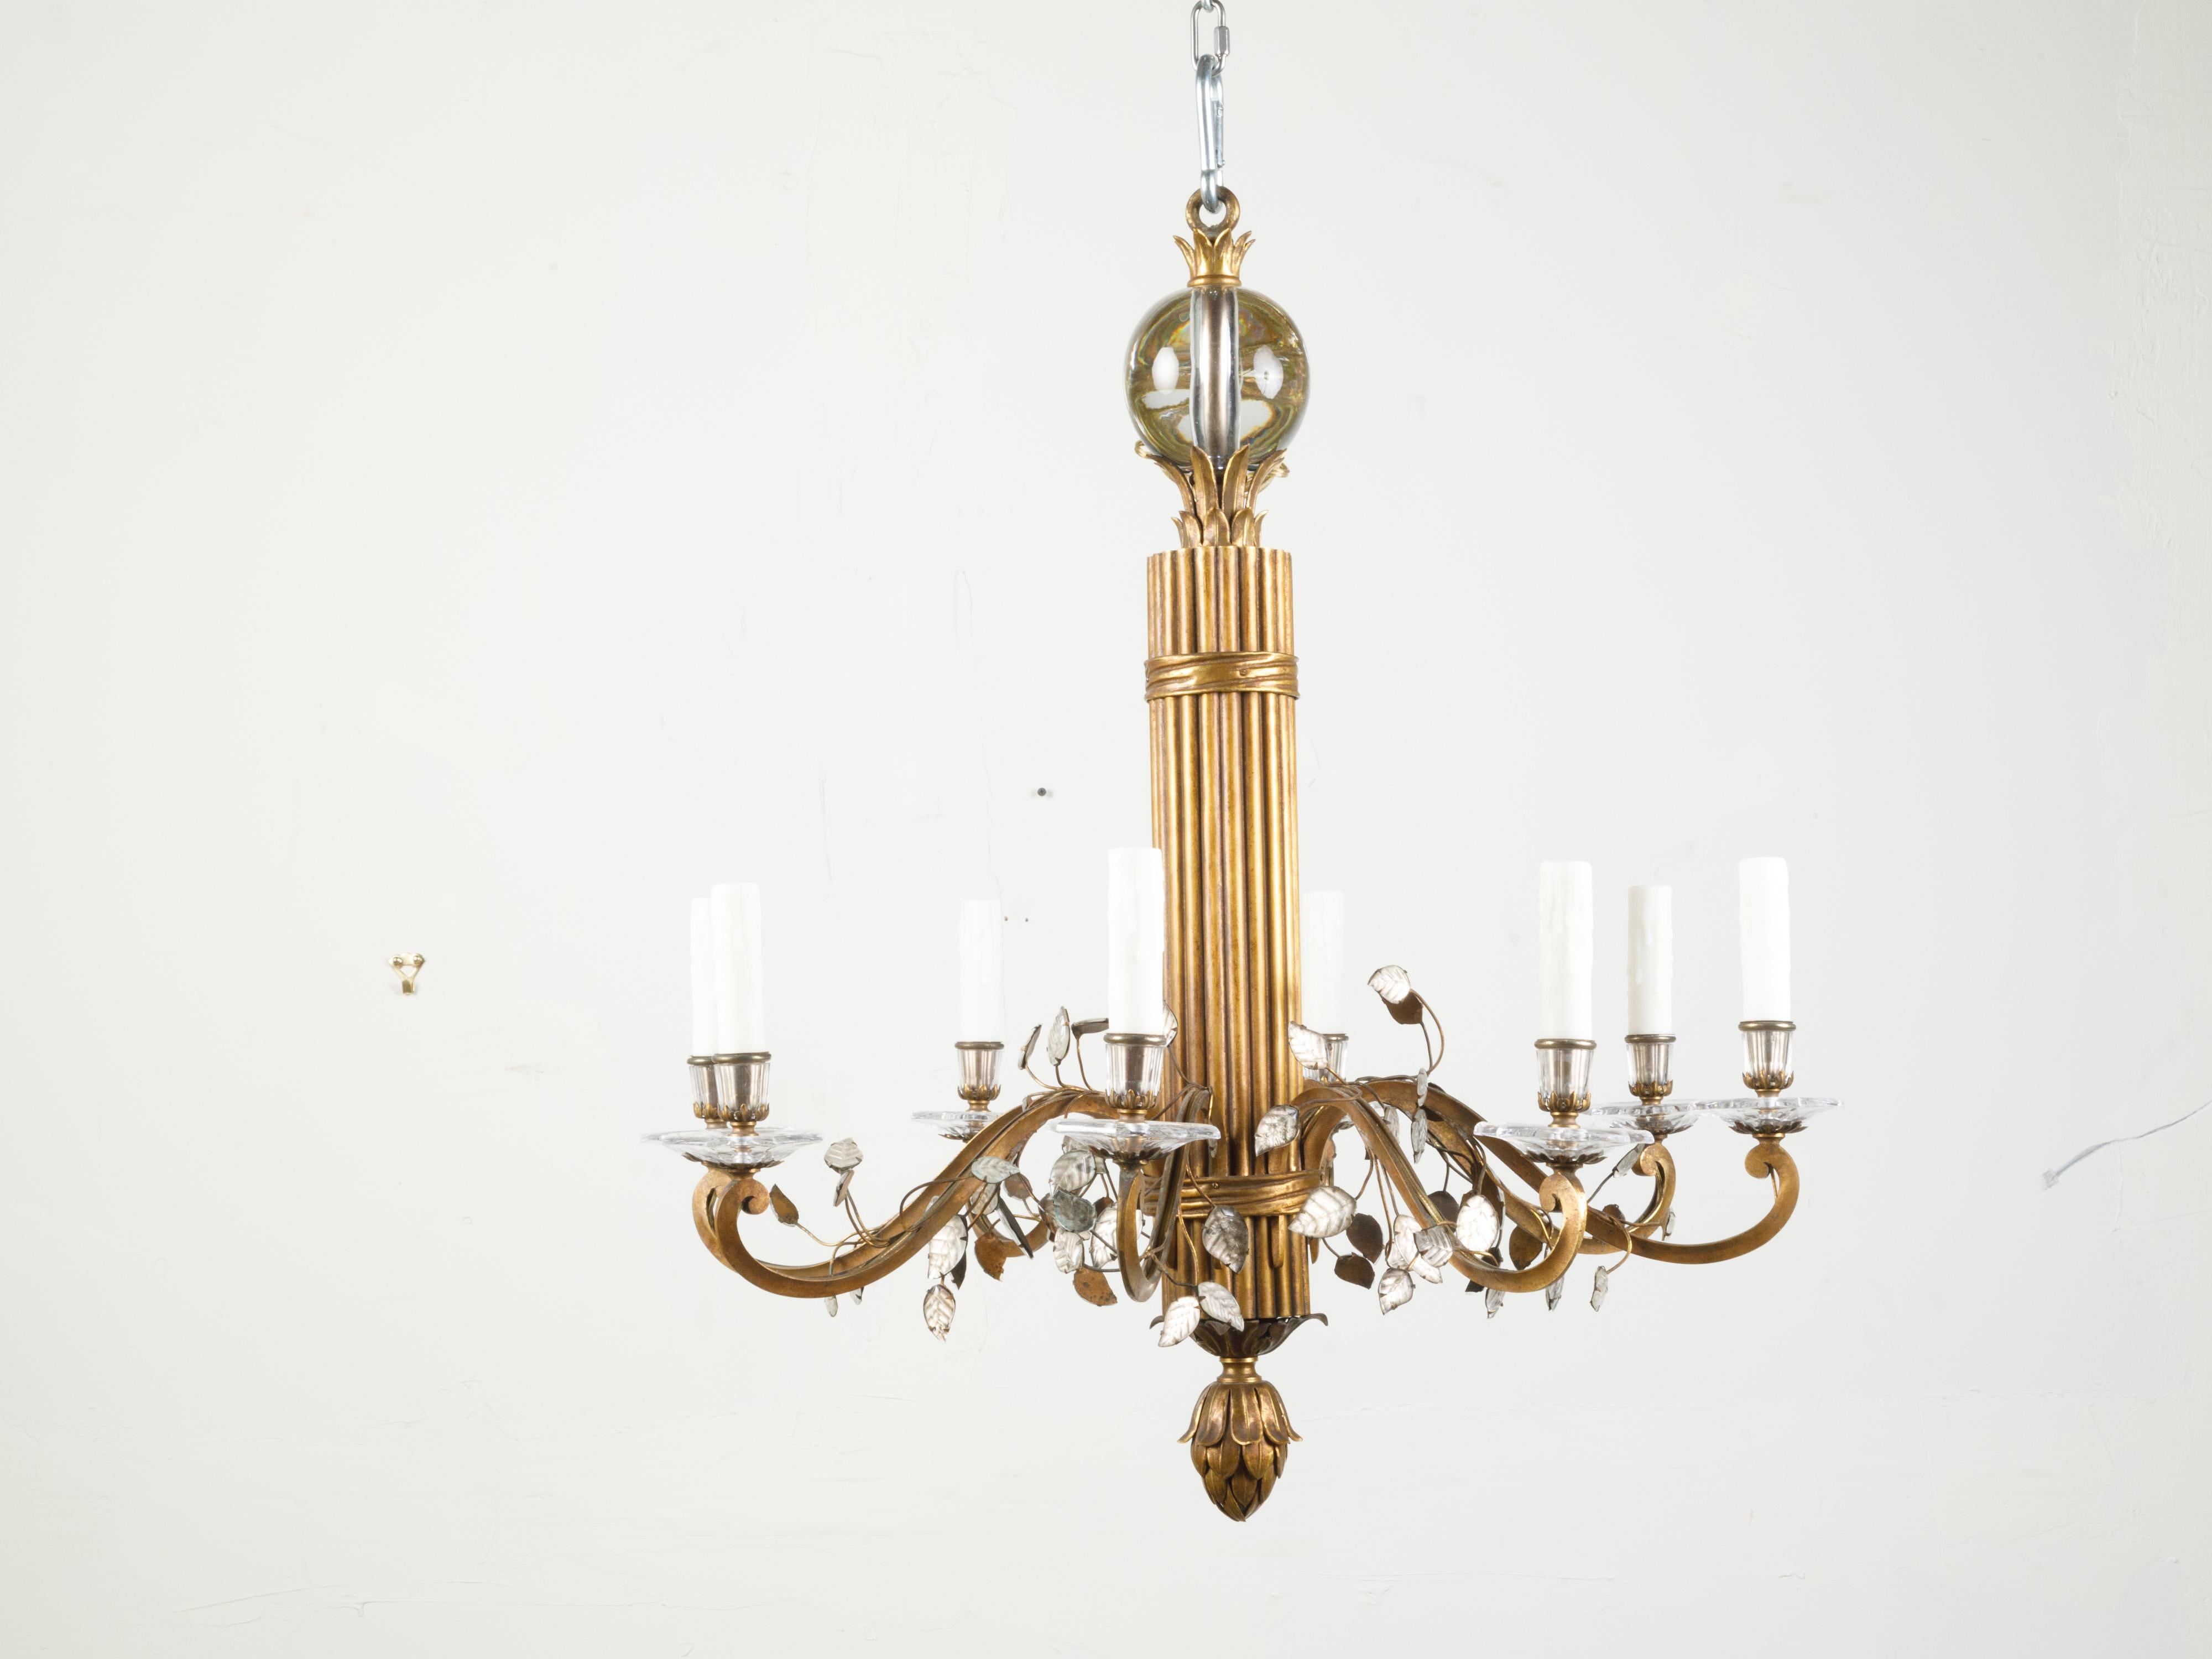 A French Maison Baguès bronze chandelier from the mid 20th century, with eight lights and rock crystal motifs. Created by Maison Baguès during the midcentury period, this chandelier features a central torch style reeded column connected to eight